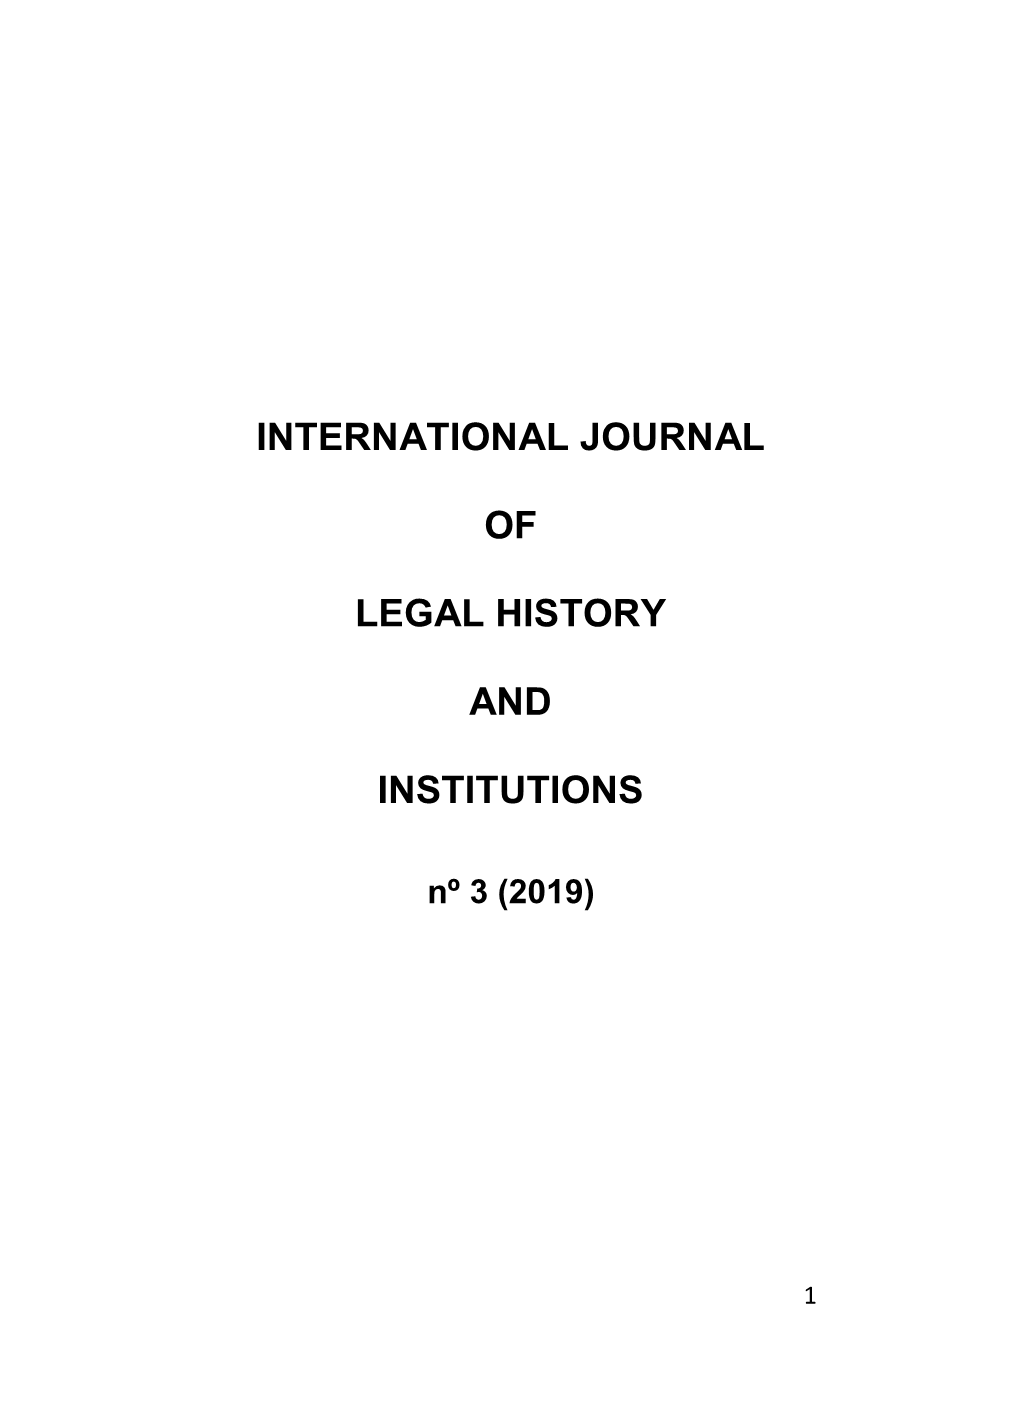 International Journal of Legal History and Institutions